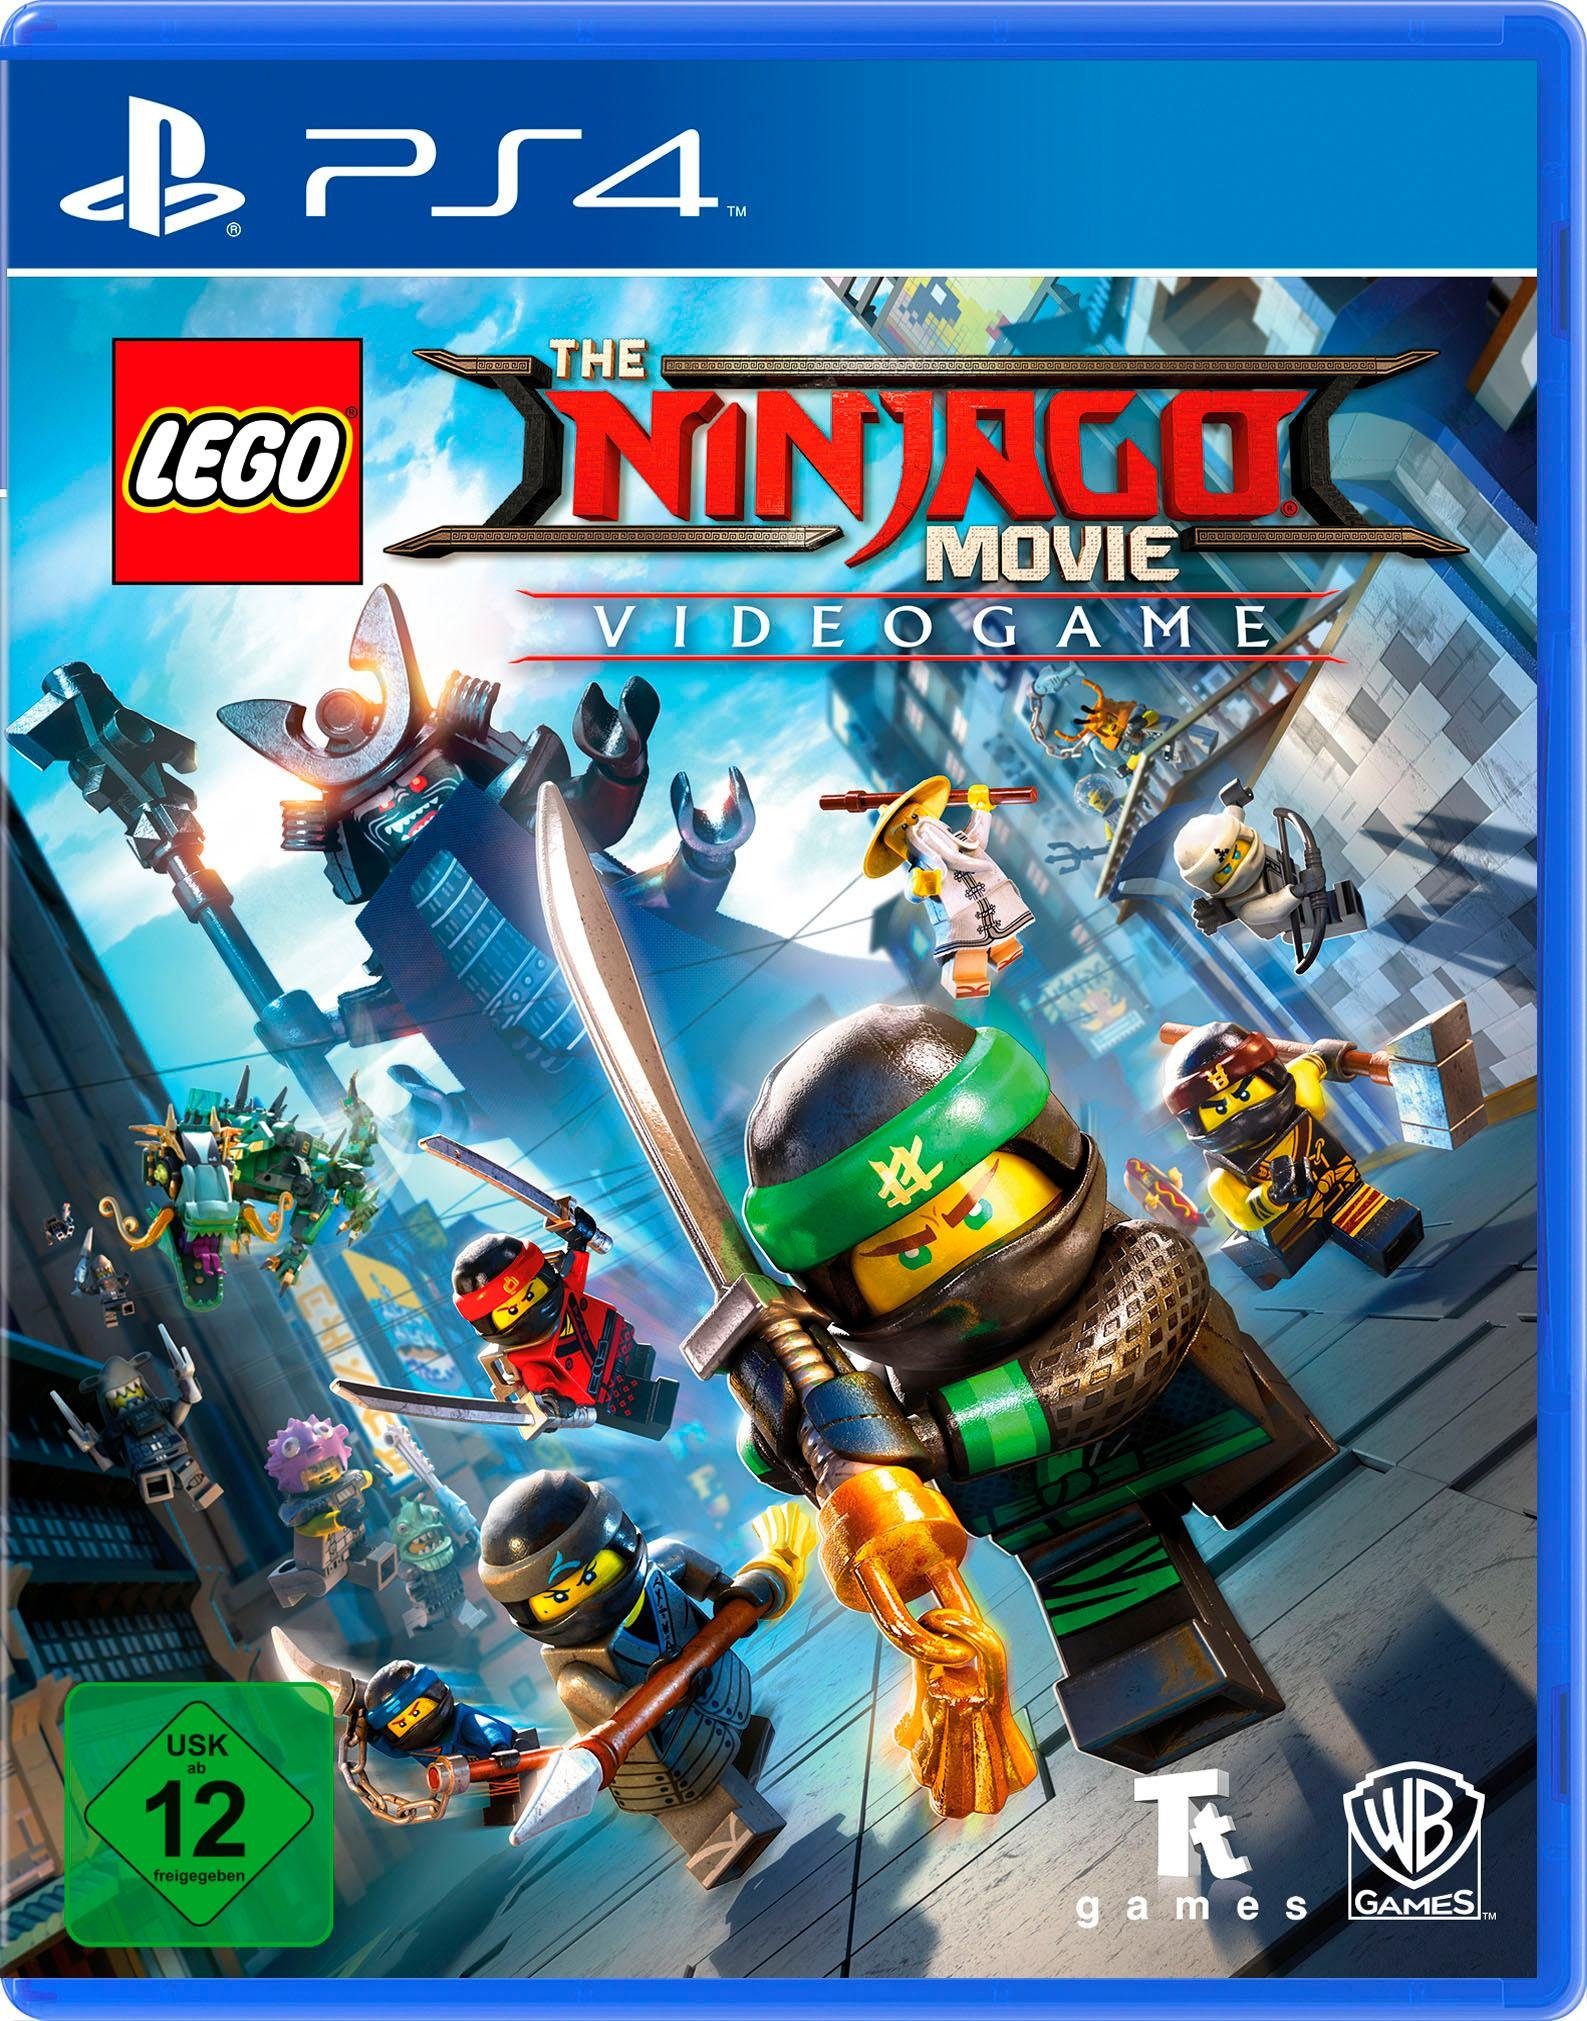 The Videogame PlayStation LEGO Pyramide Movie 4, Software